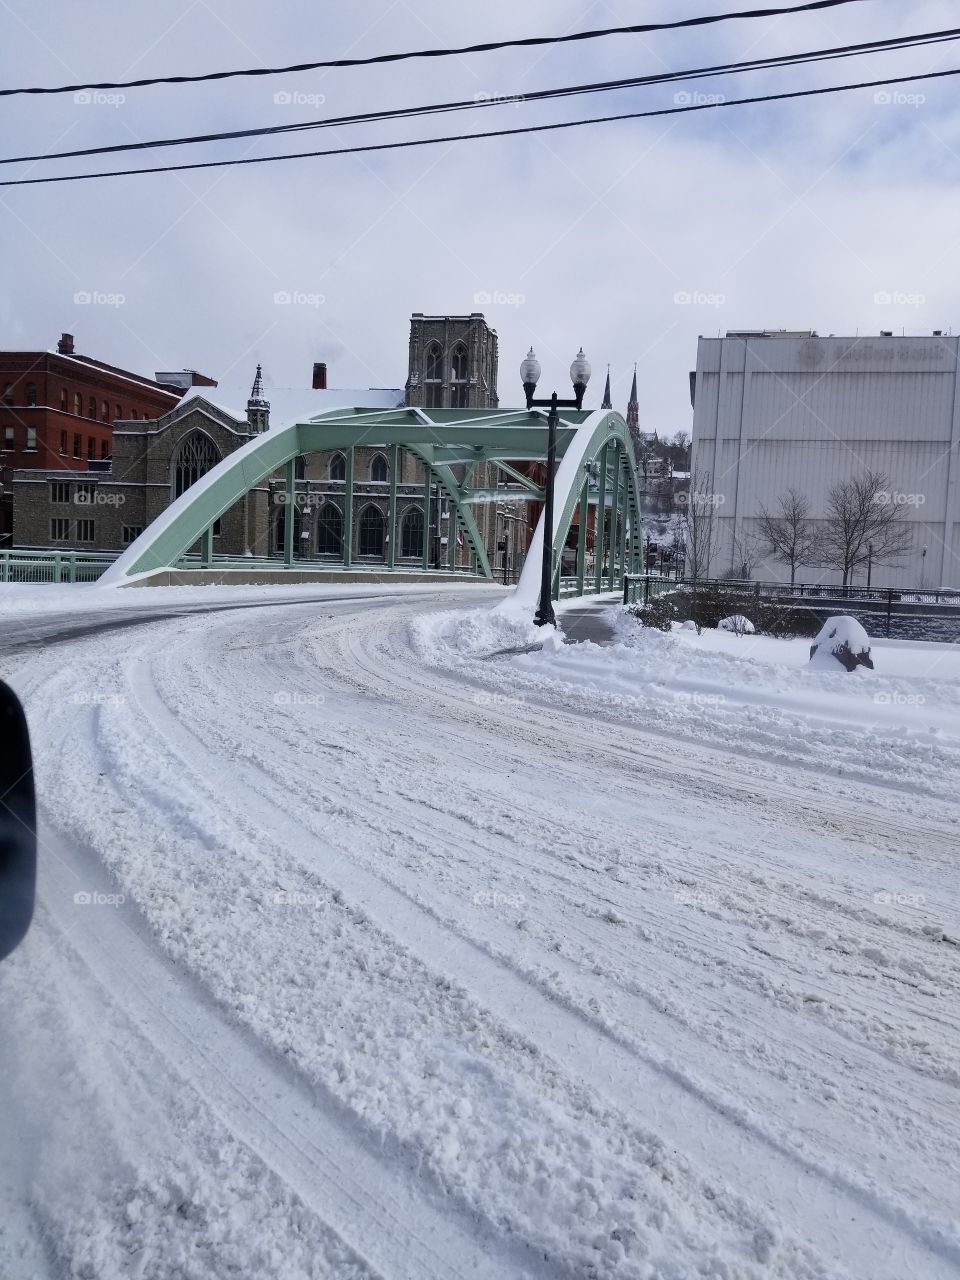 bridge in Oil City, PA during the winter of 2017 taken within a vehicle  out the passenger window